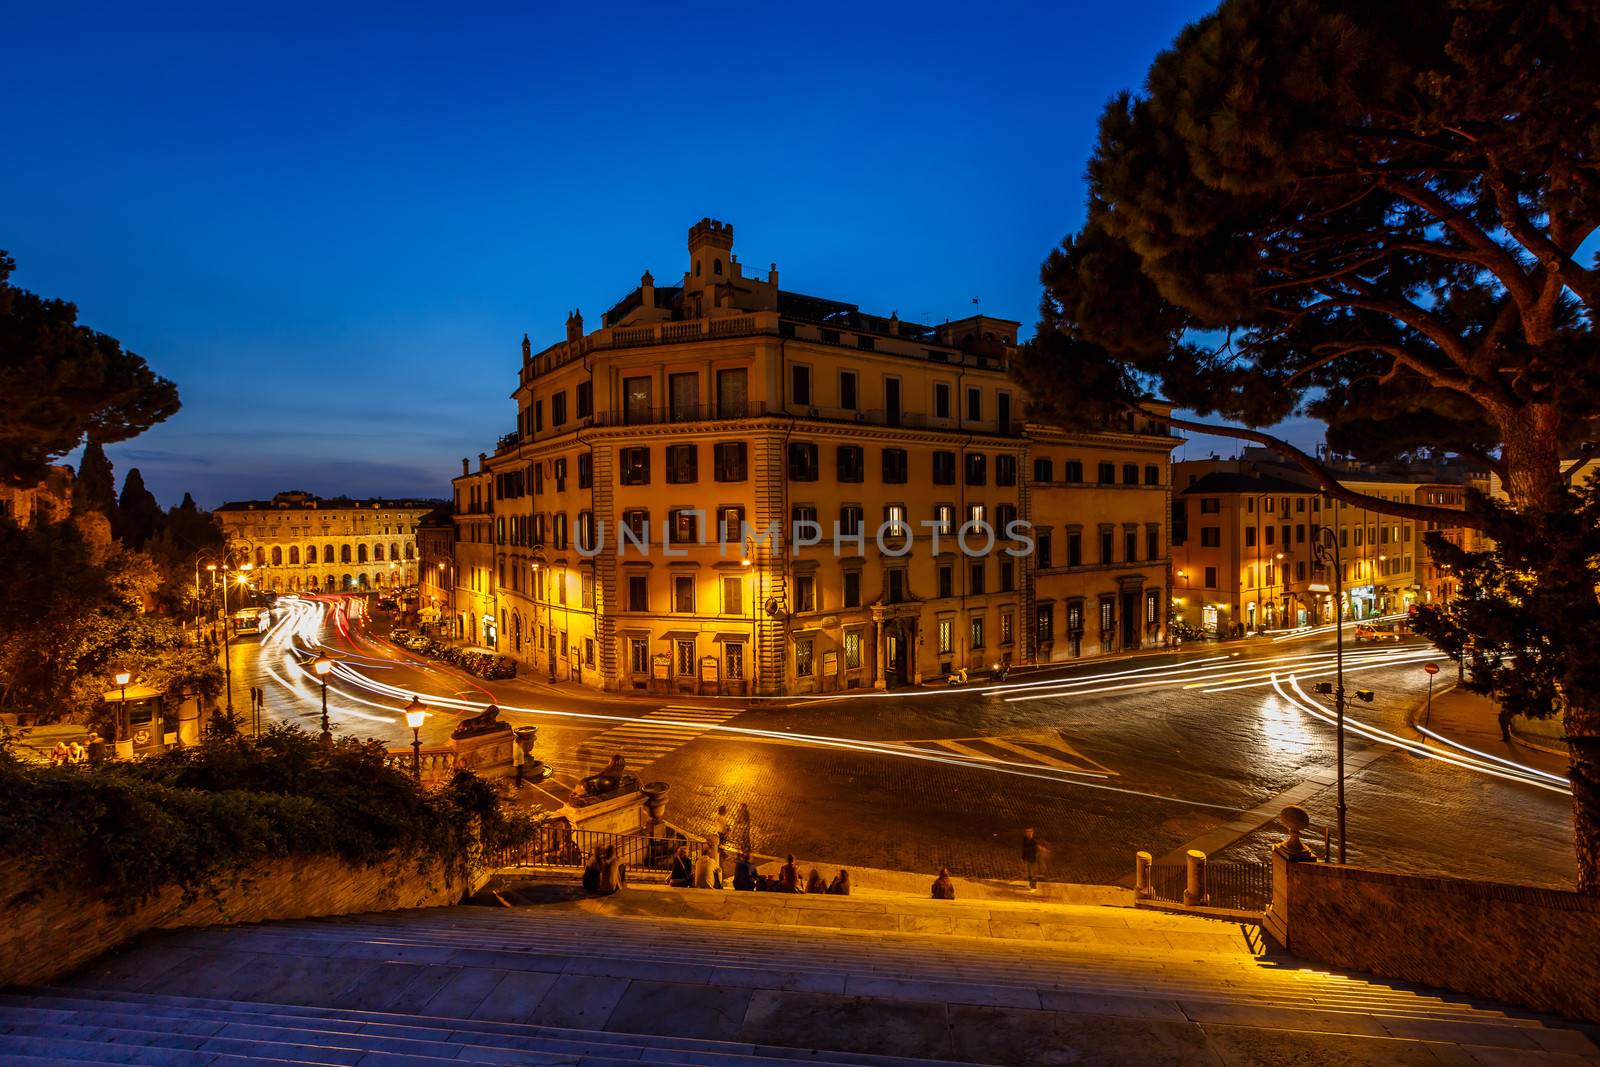 Marcello Theater and Traffic Trails on Via Marcello, View from Capitoline Hill, Rome, Italy